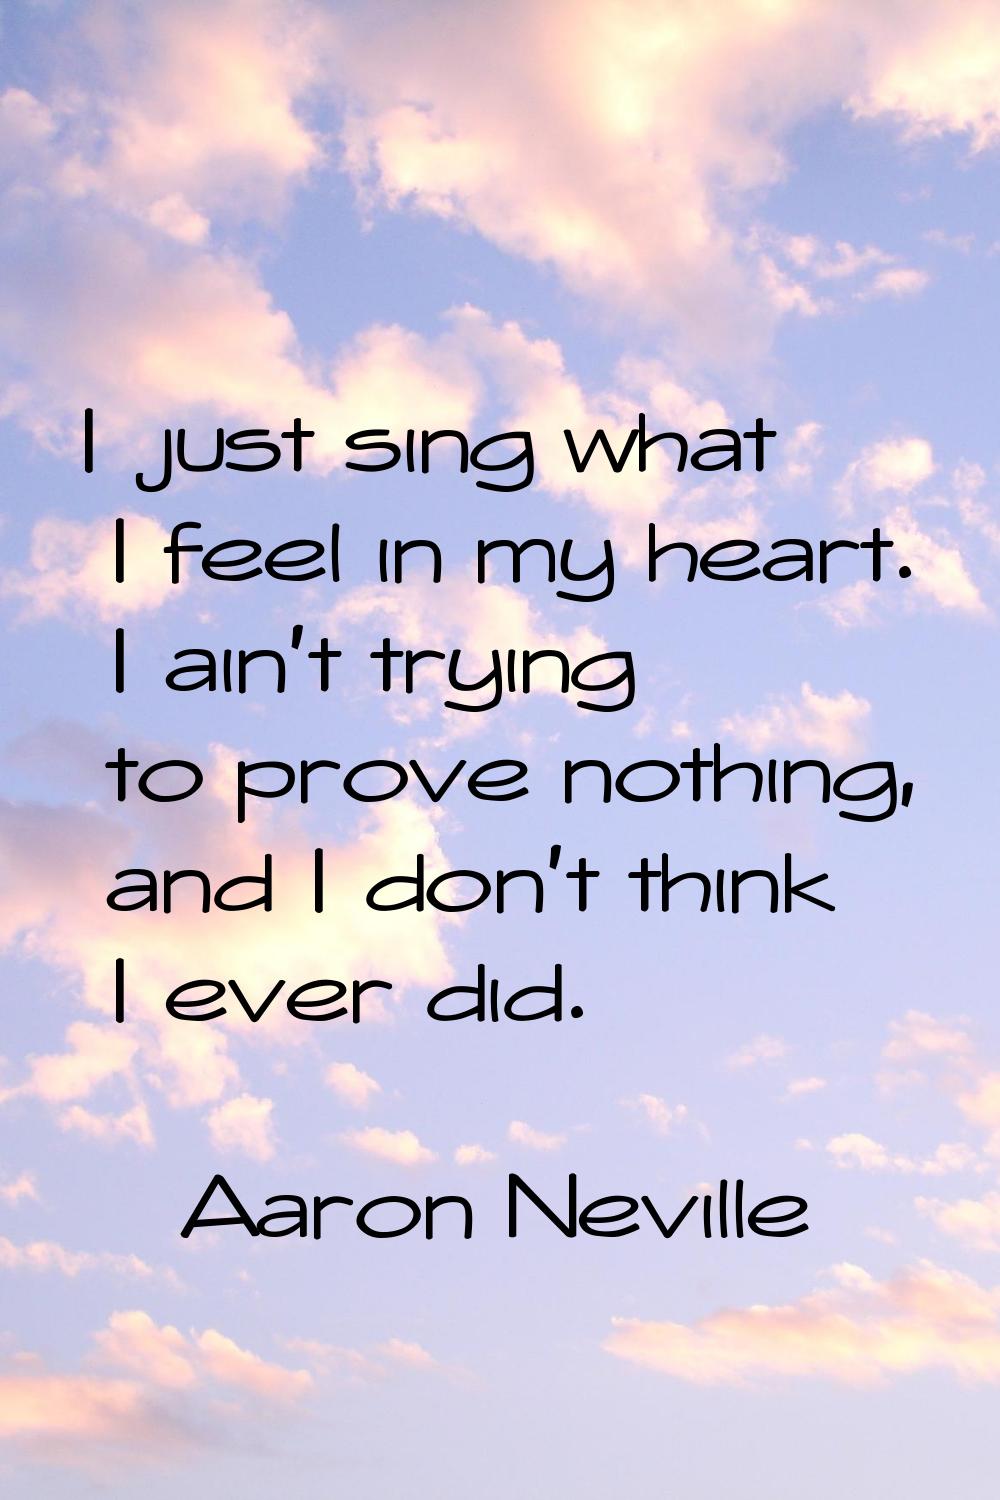 I just sing what I feel in my heart. I ain't trying to prove nothing, and I don't think I ever did.